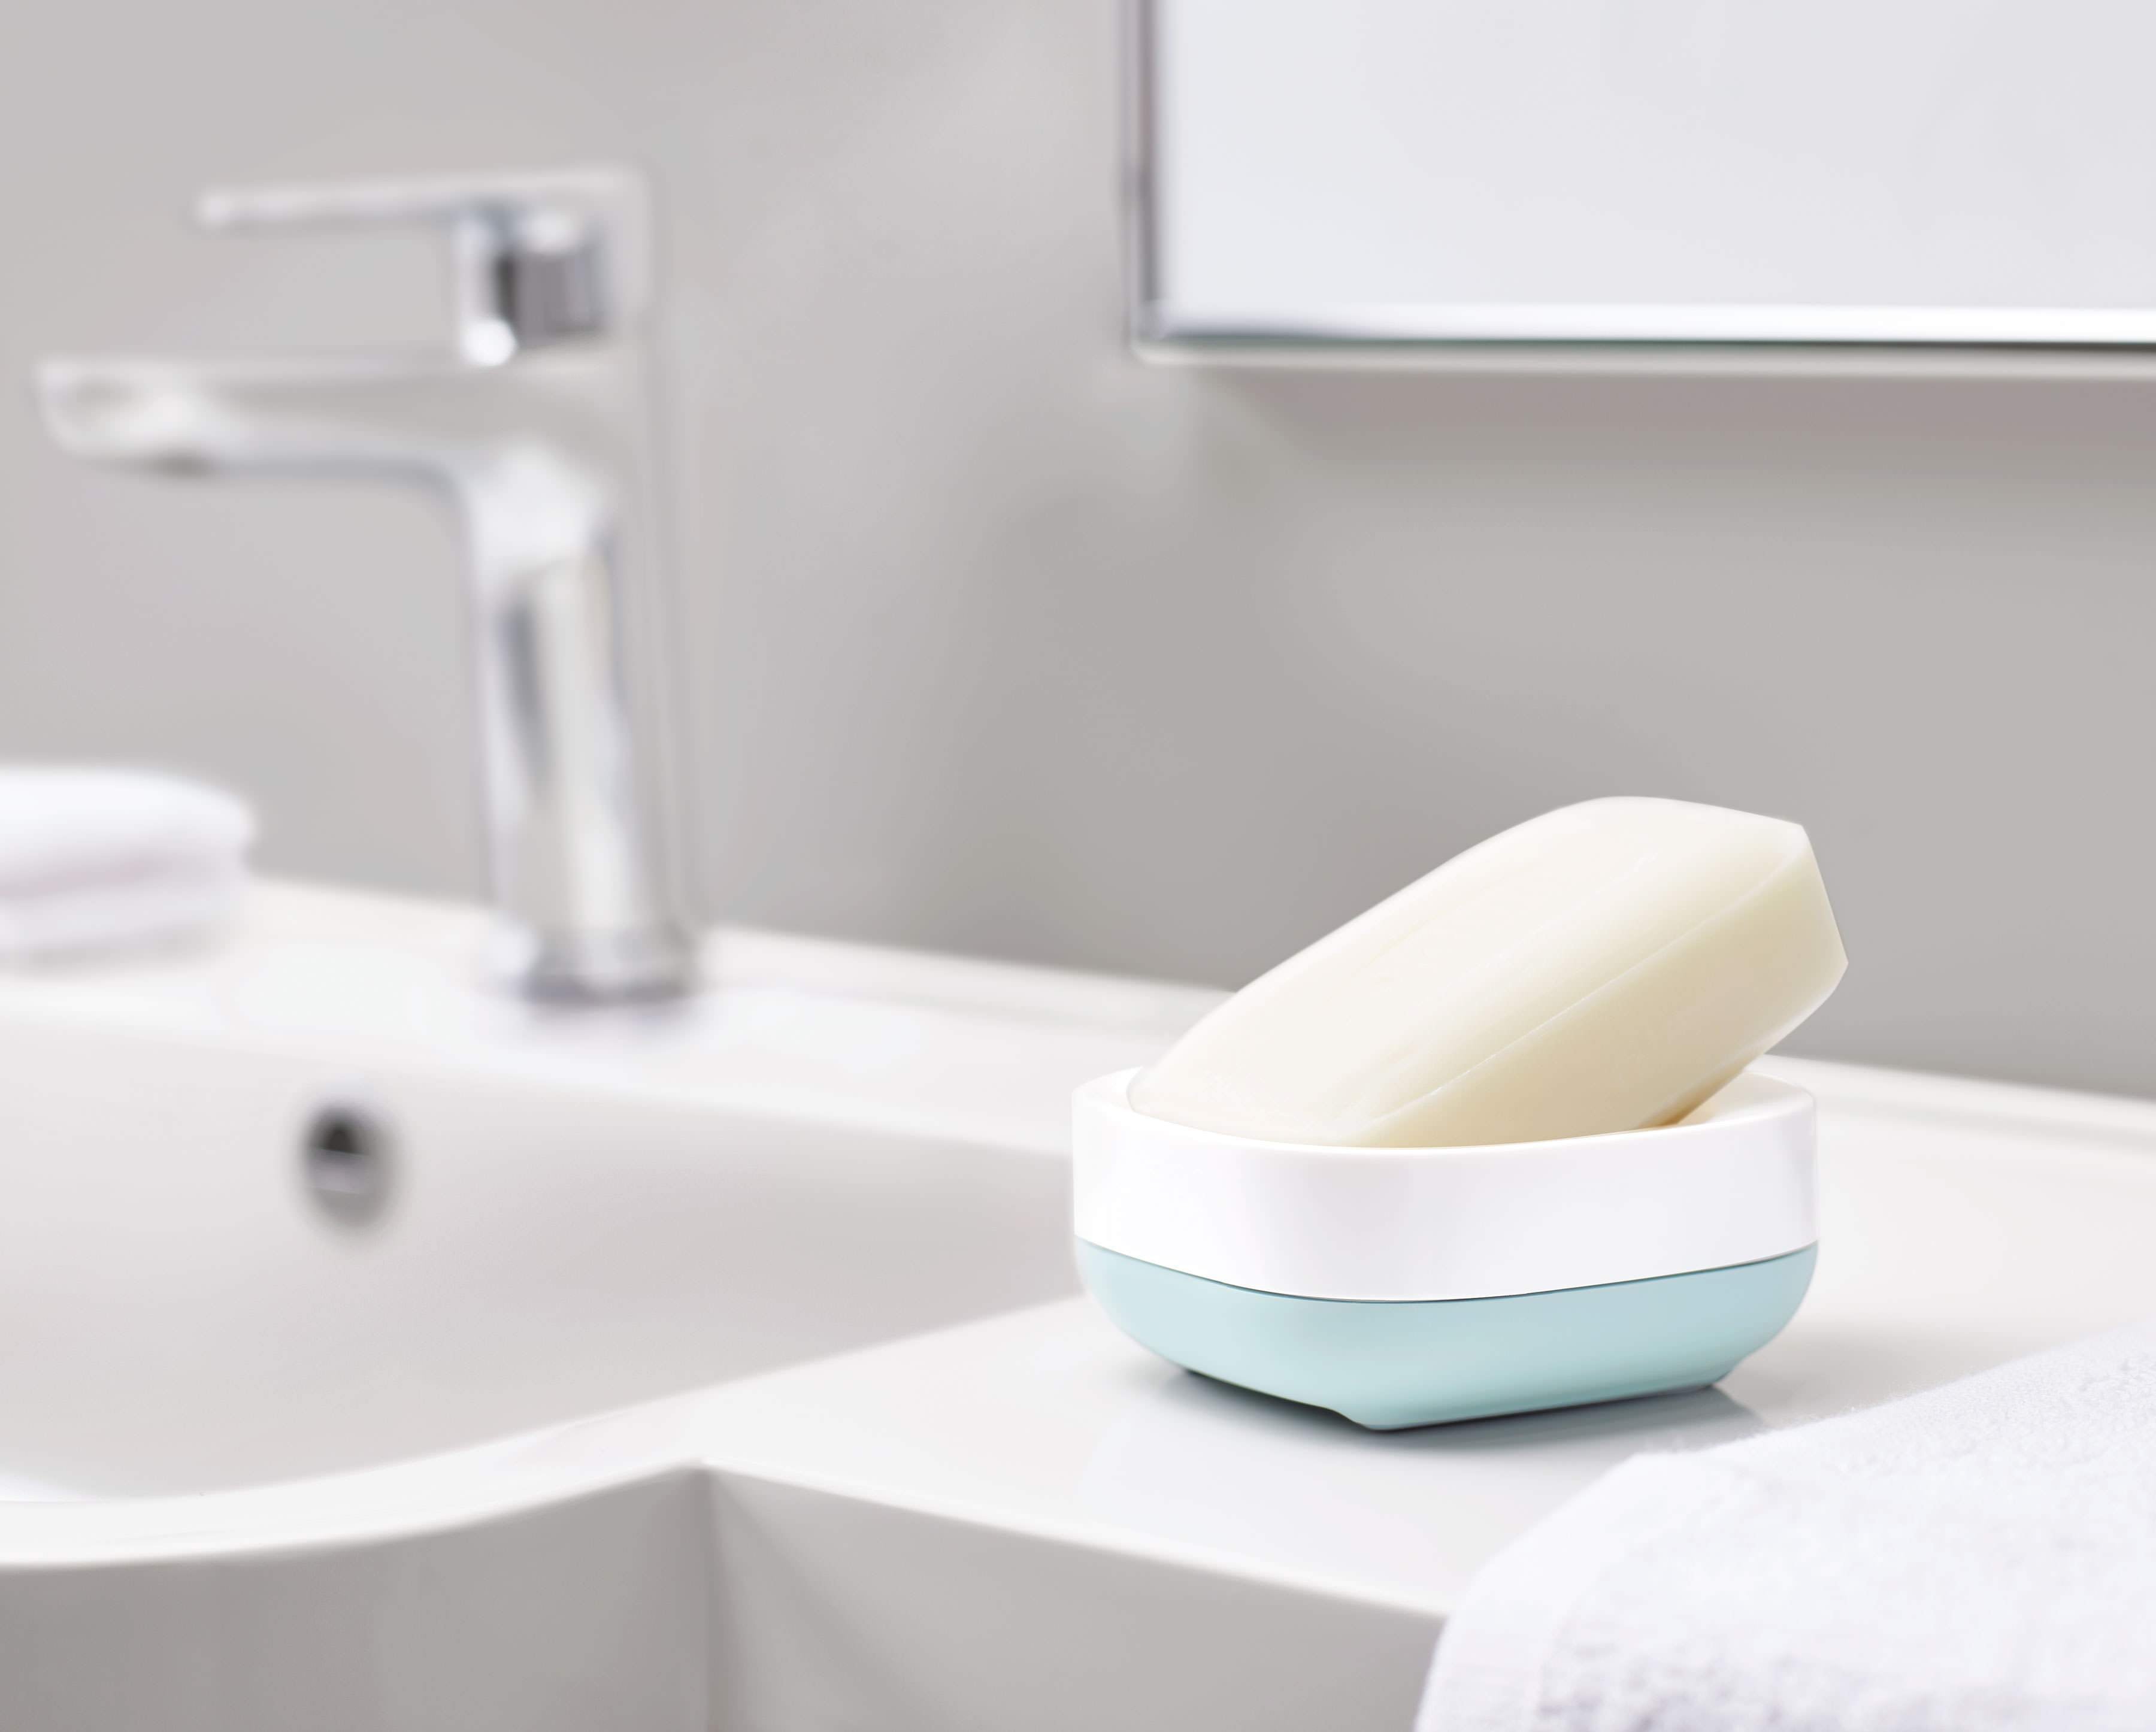 BEON.COM.AU  This clever soap dish has a unique, sloping design that saves space and allows any excess water or suds from your soap to neatly drain away.  Unique, sloping design saves space Holds a full-size soap bar in less space Clever angled base allows soap to drain Dismantles for easy cleaning Ventilate... Joseph Joseph at BEON.COM.AU